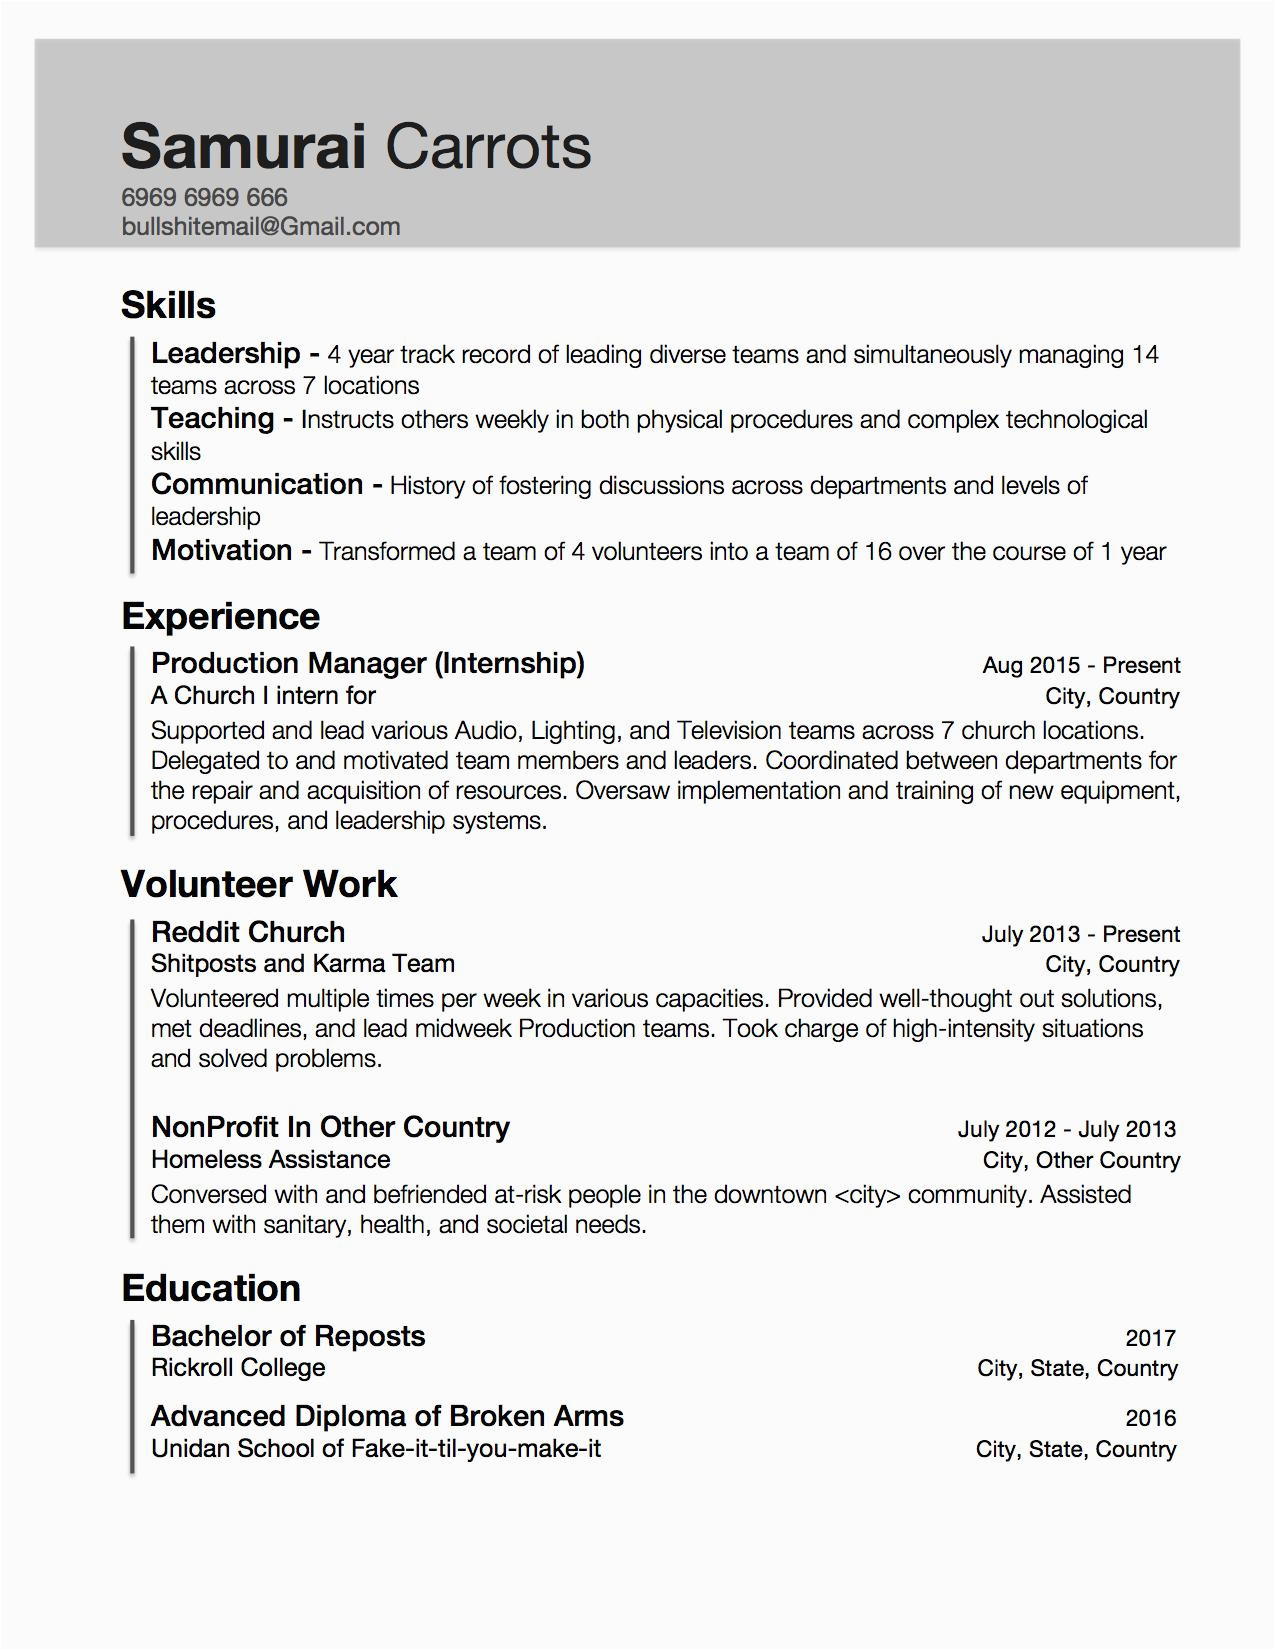 Sample Resume with Little Job Experience How to Write A Resume with No Experience Reddit Best